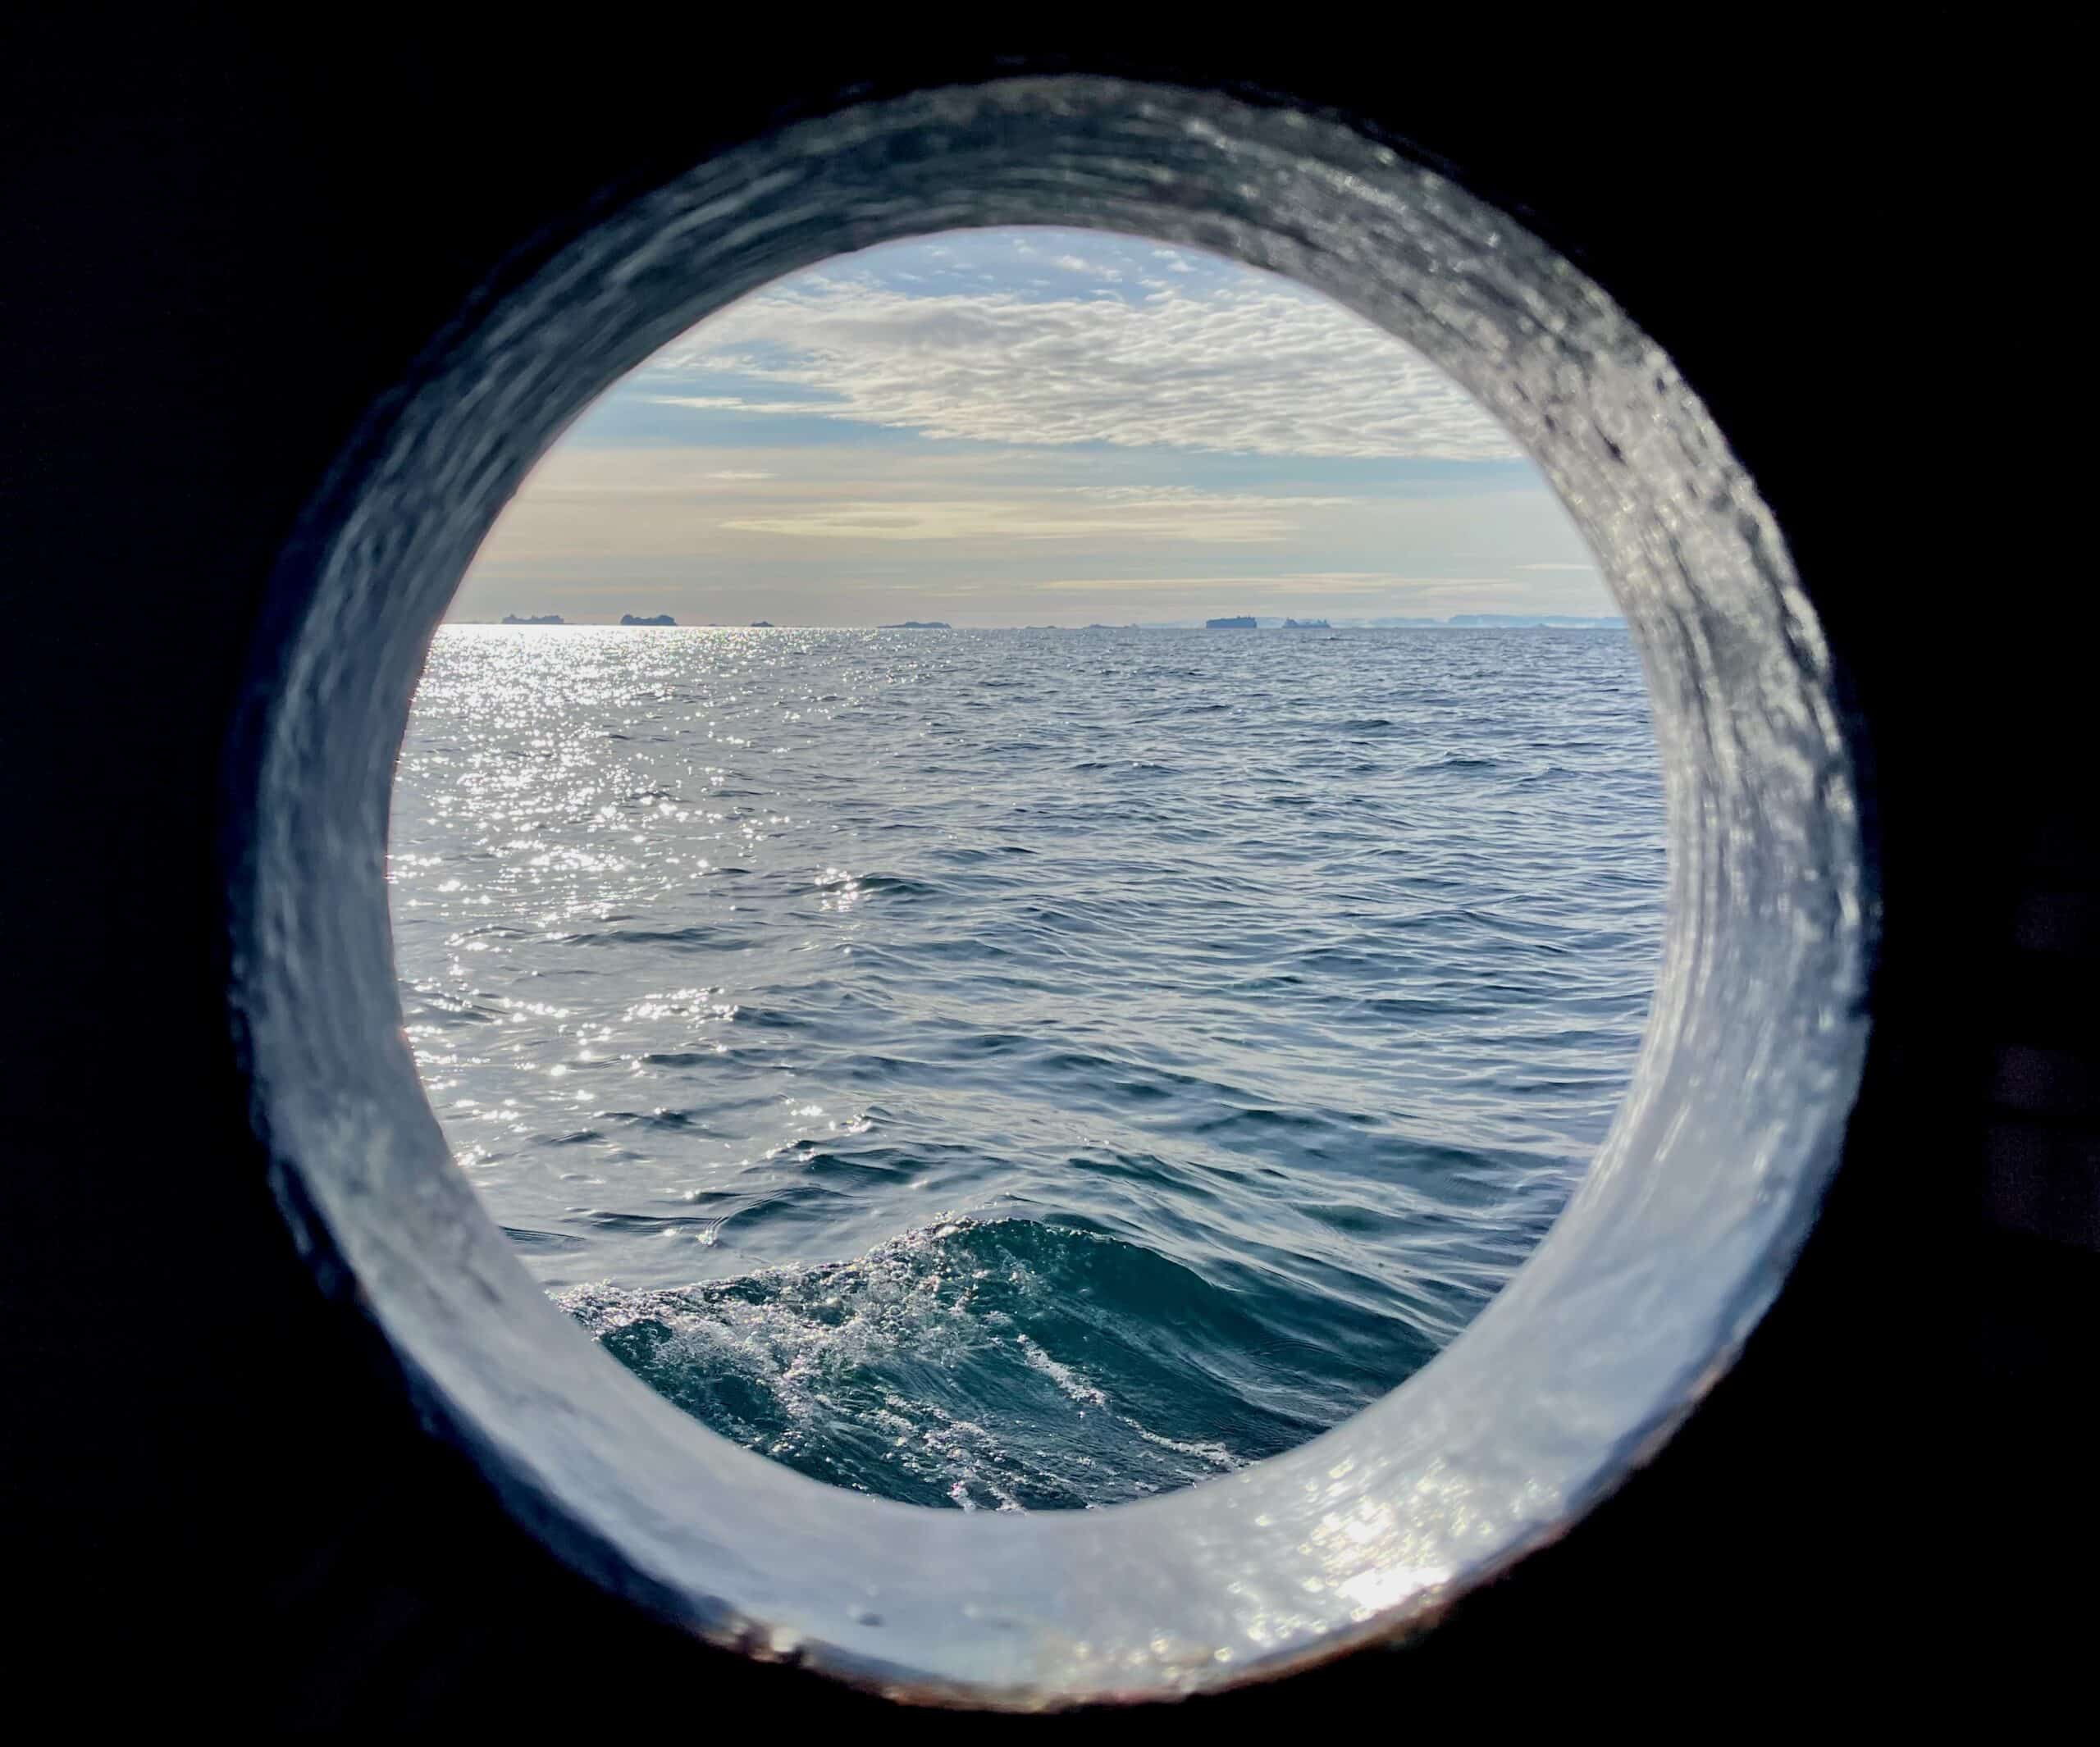 Water, sky, and clouds as seen through a circular porthole